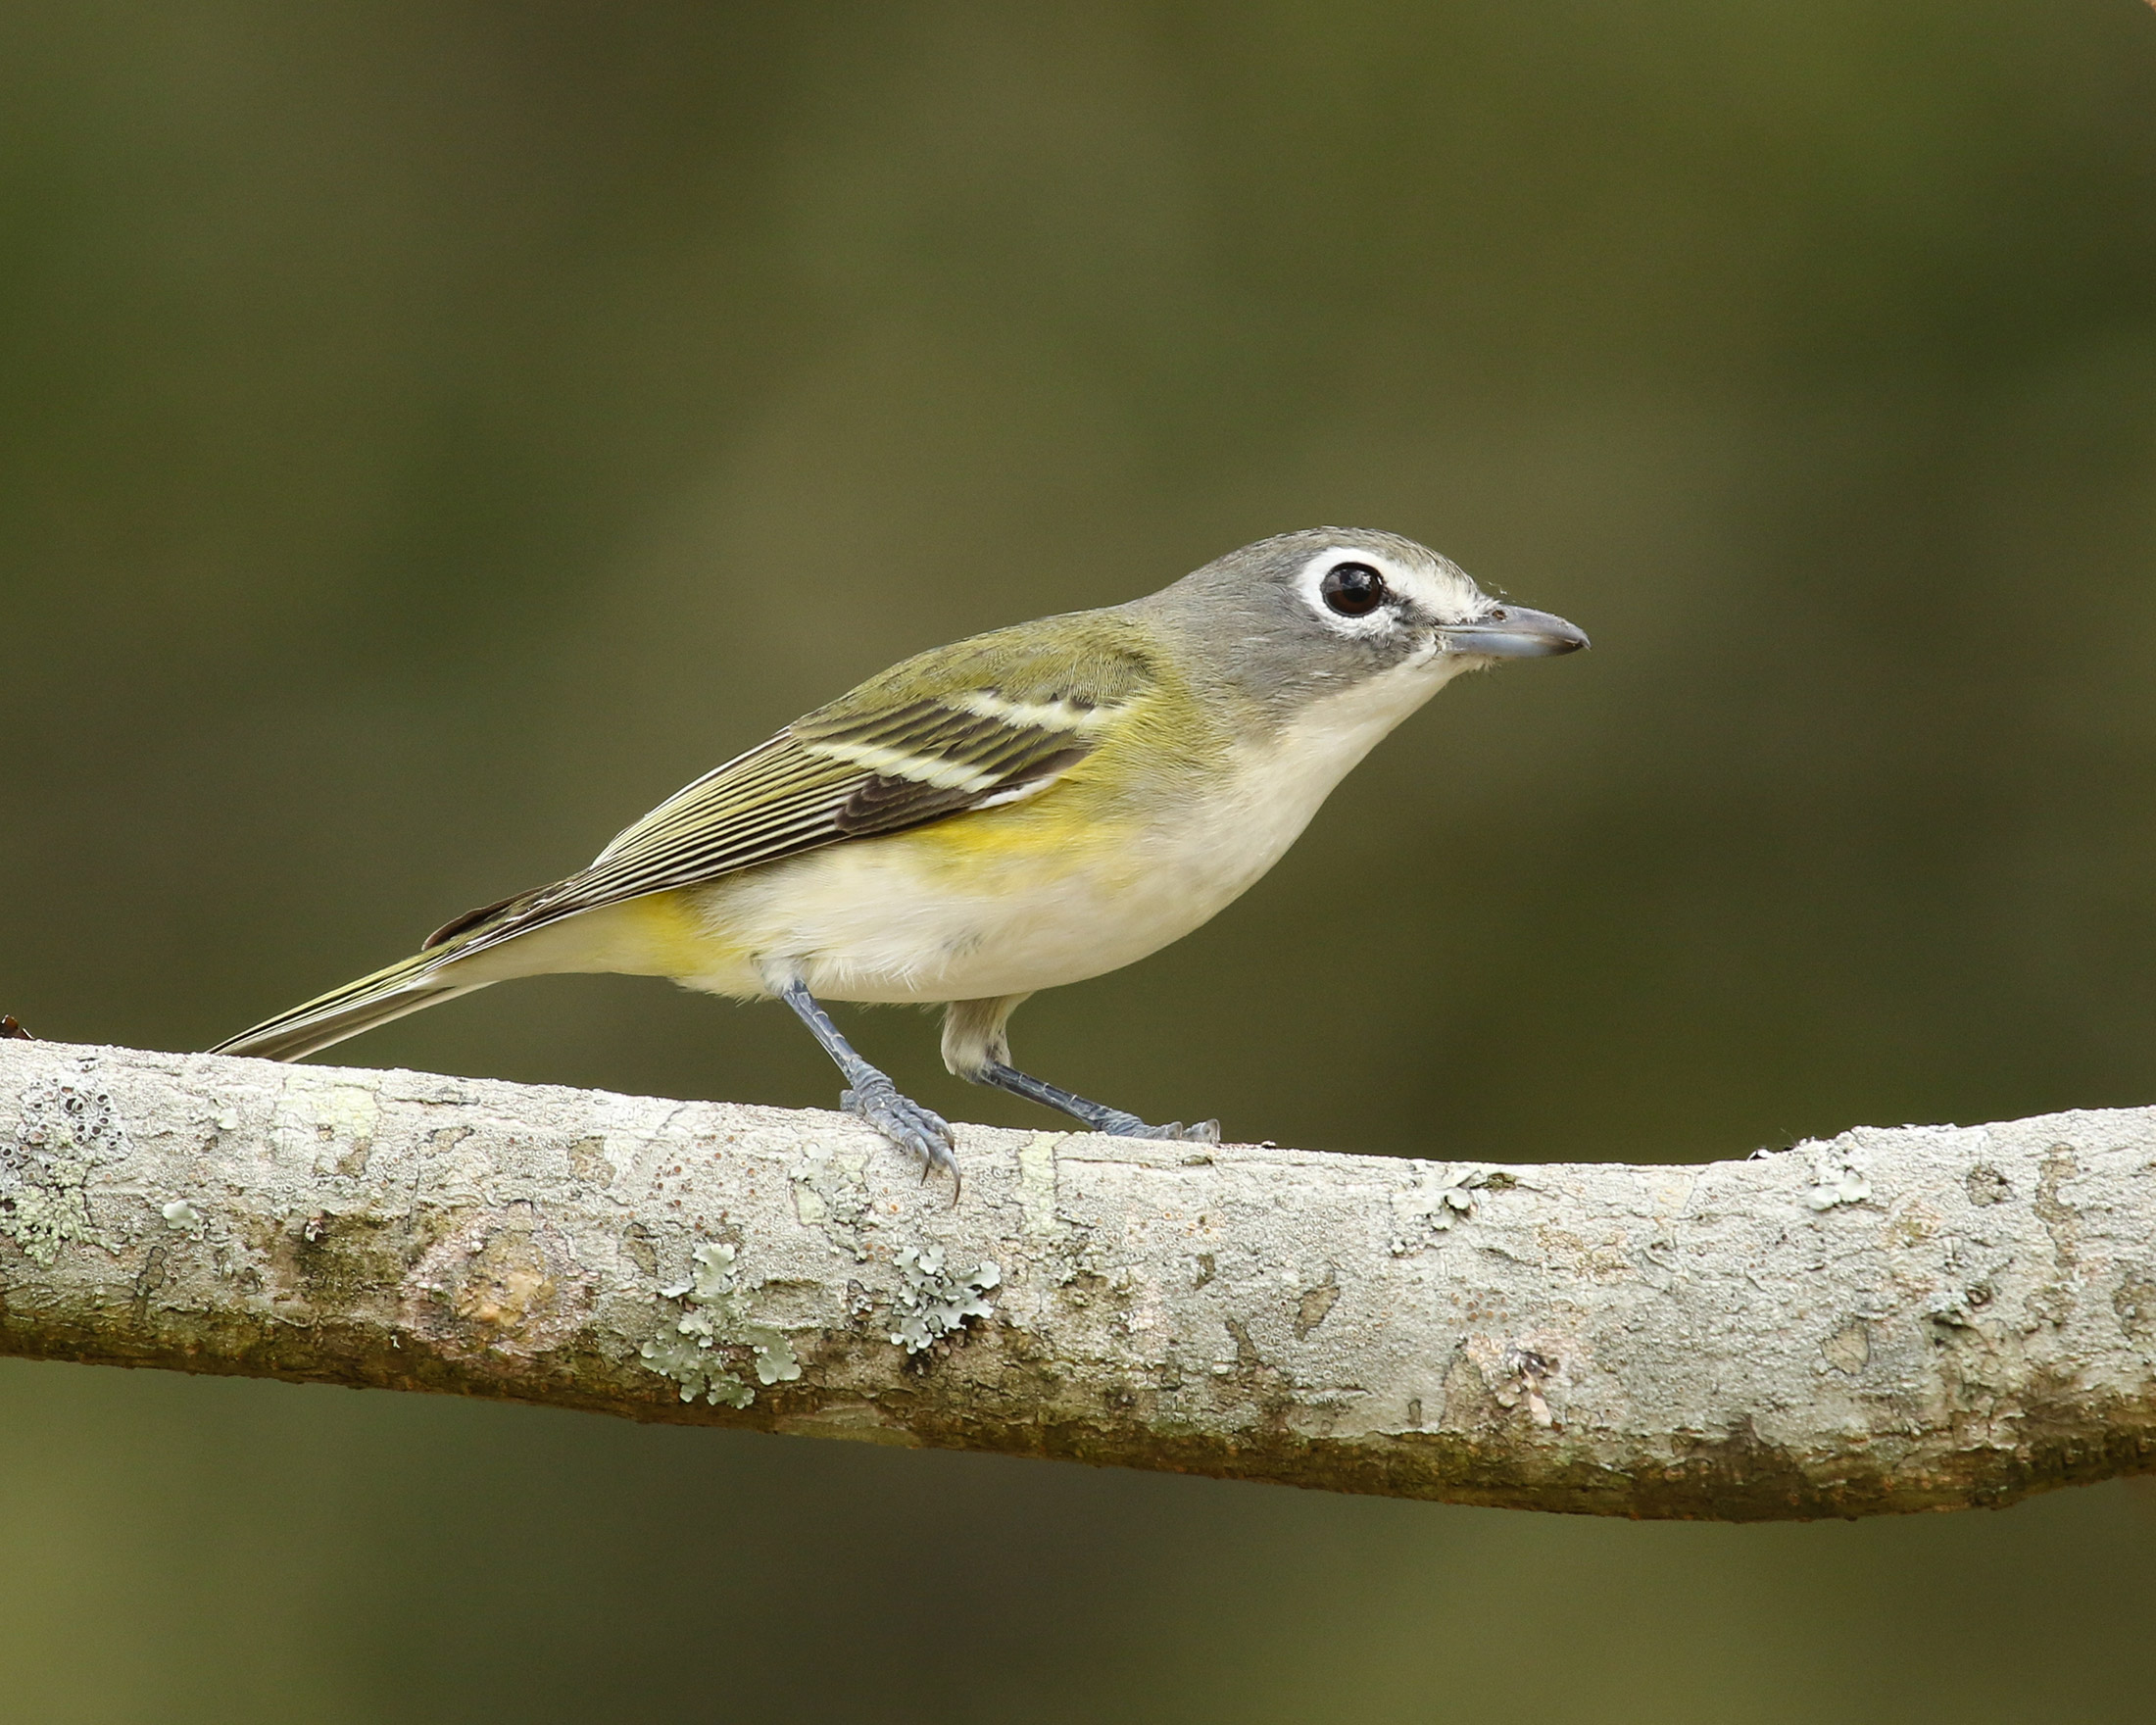 A yellow, gray, brown, and white bird stands on a branch pointing its head to the right side of the frame 